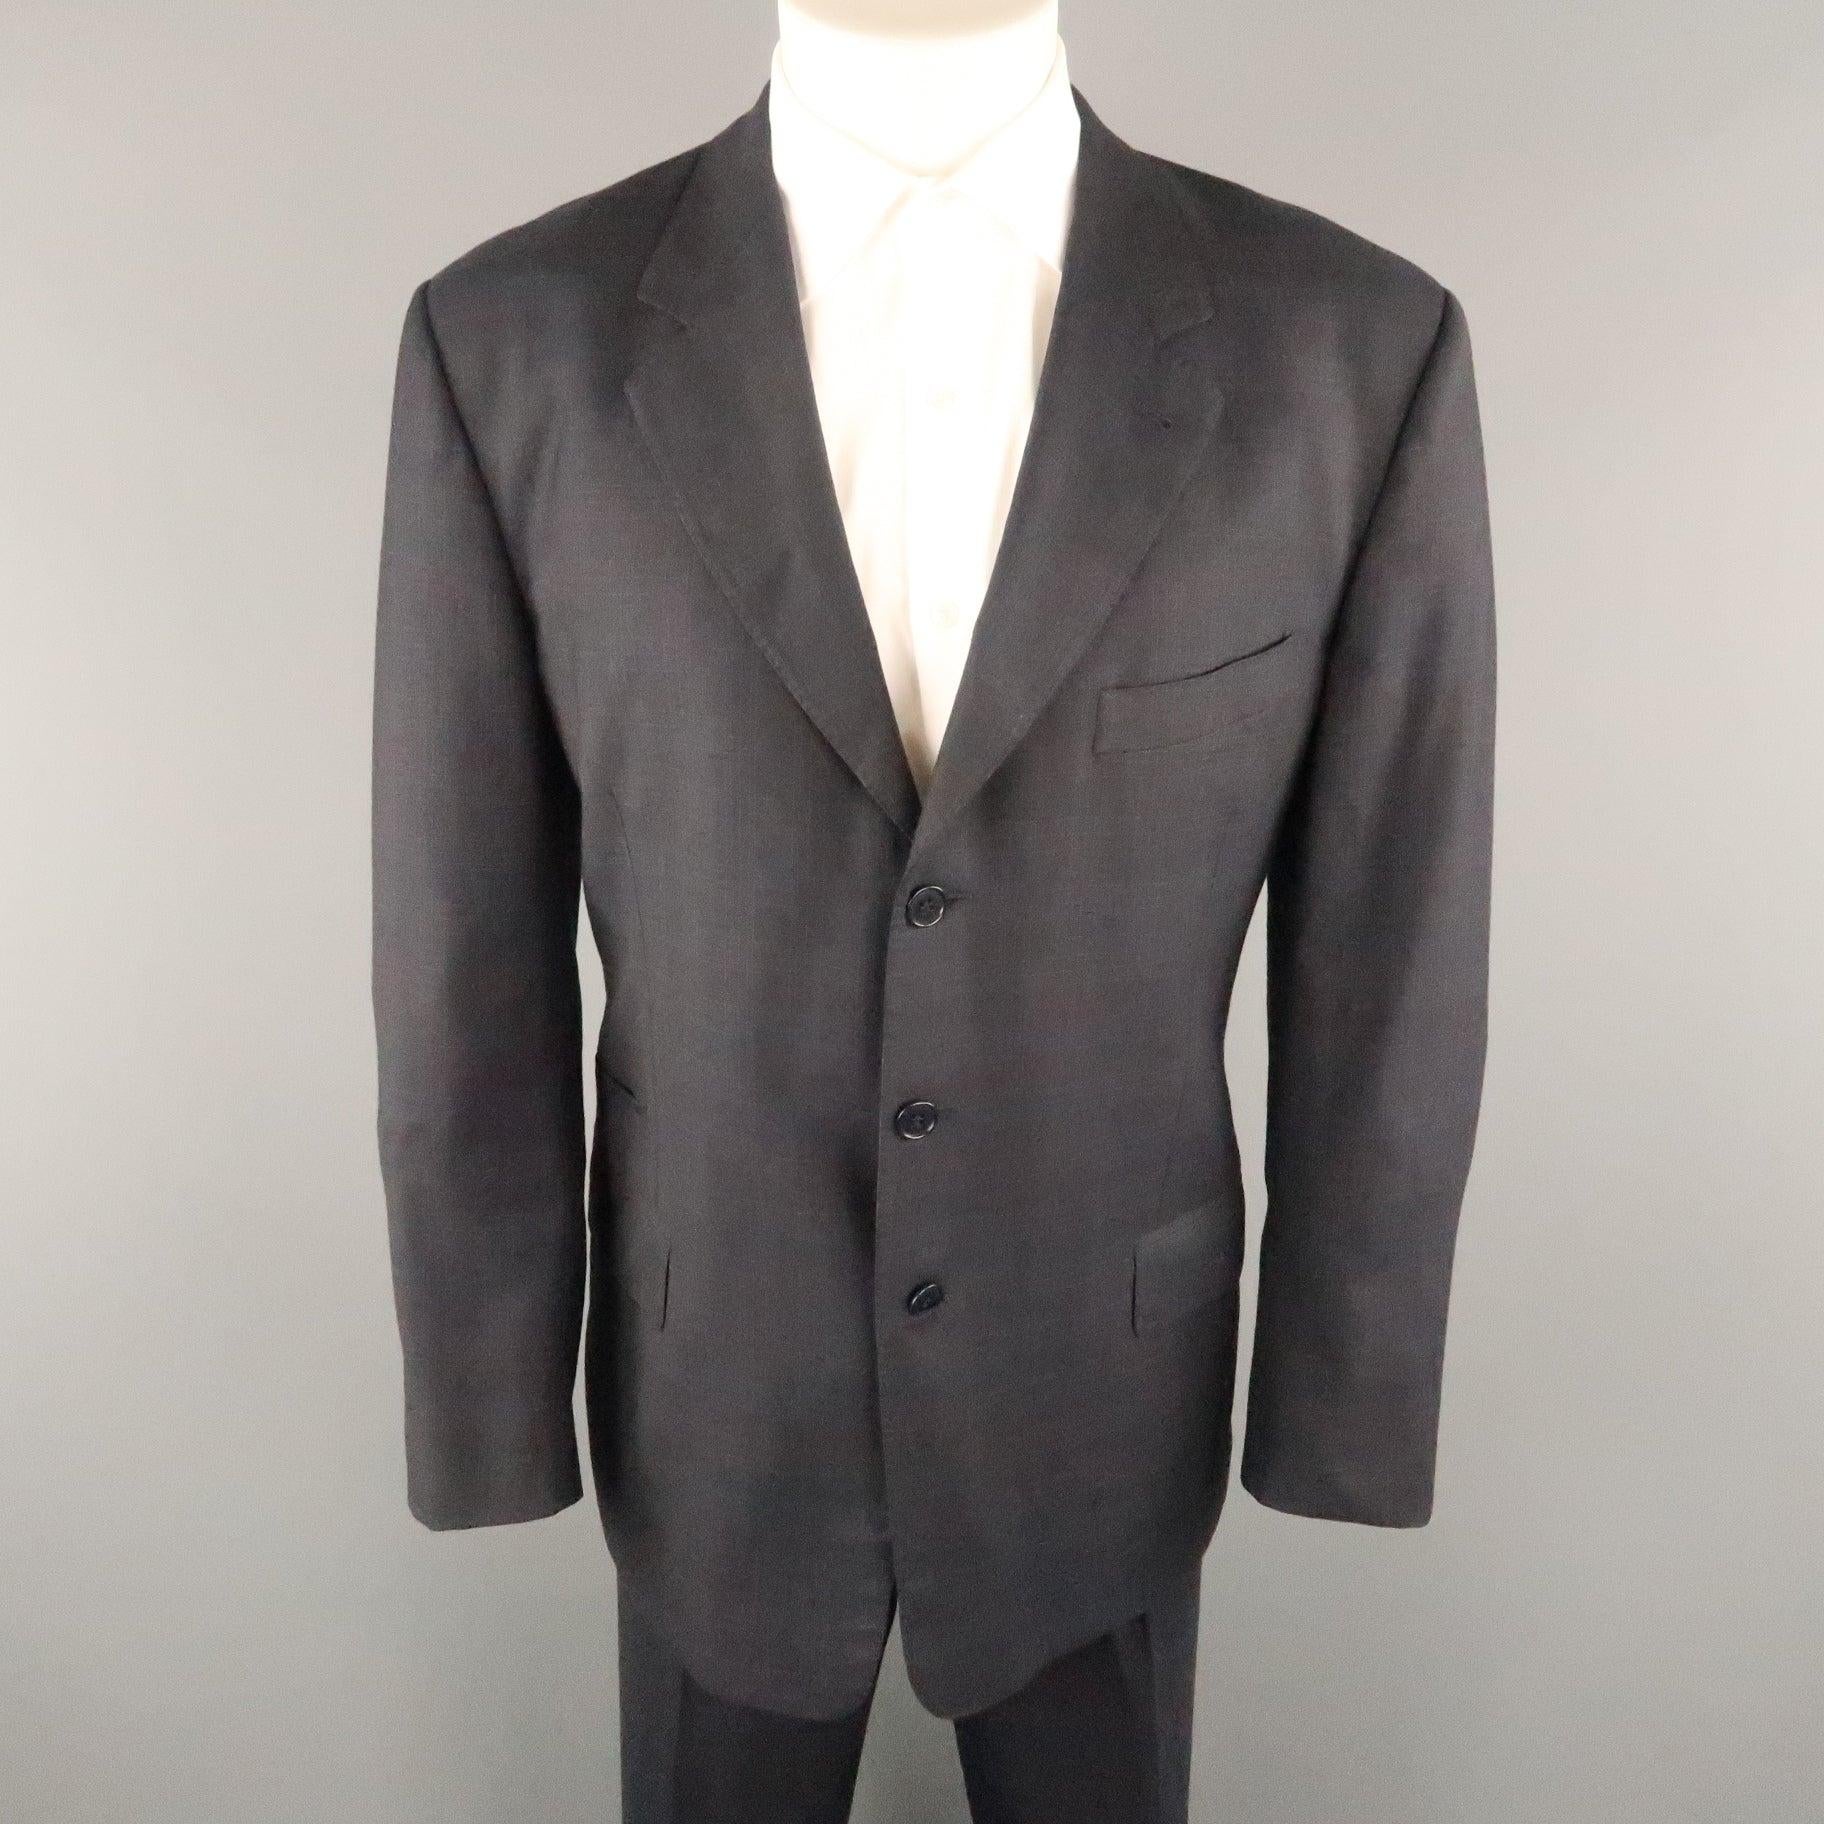 PAUL SMITH suit comes in a charcoal plaid wool featuring a notch lapel, three button closure, flap pockets, and a matching front flat style pant. Made in Italy. 
Excellent Pre-Owned Condition.
 

Marked:   IT 42
 

Measurements: 
 